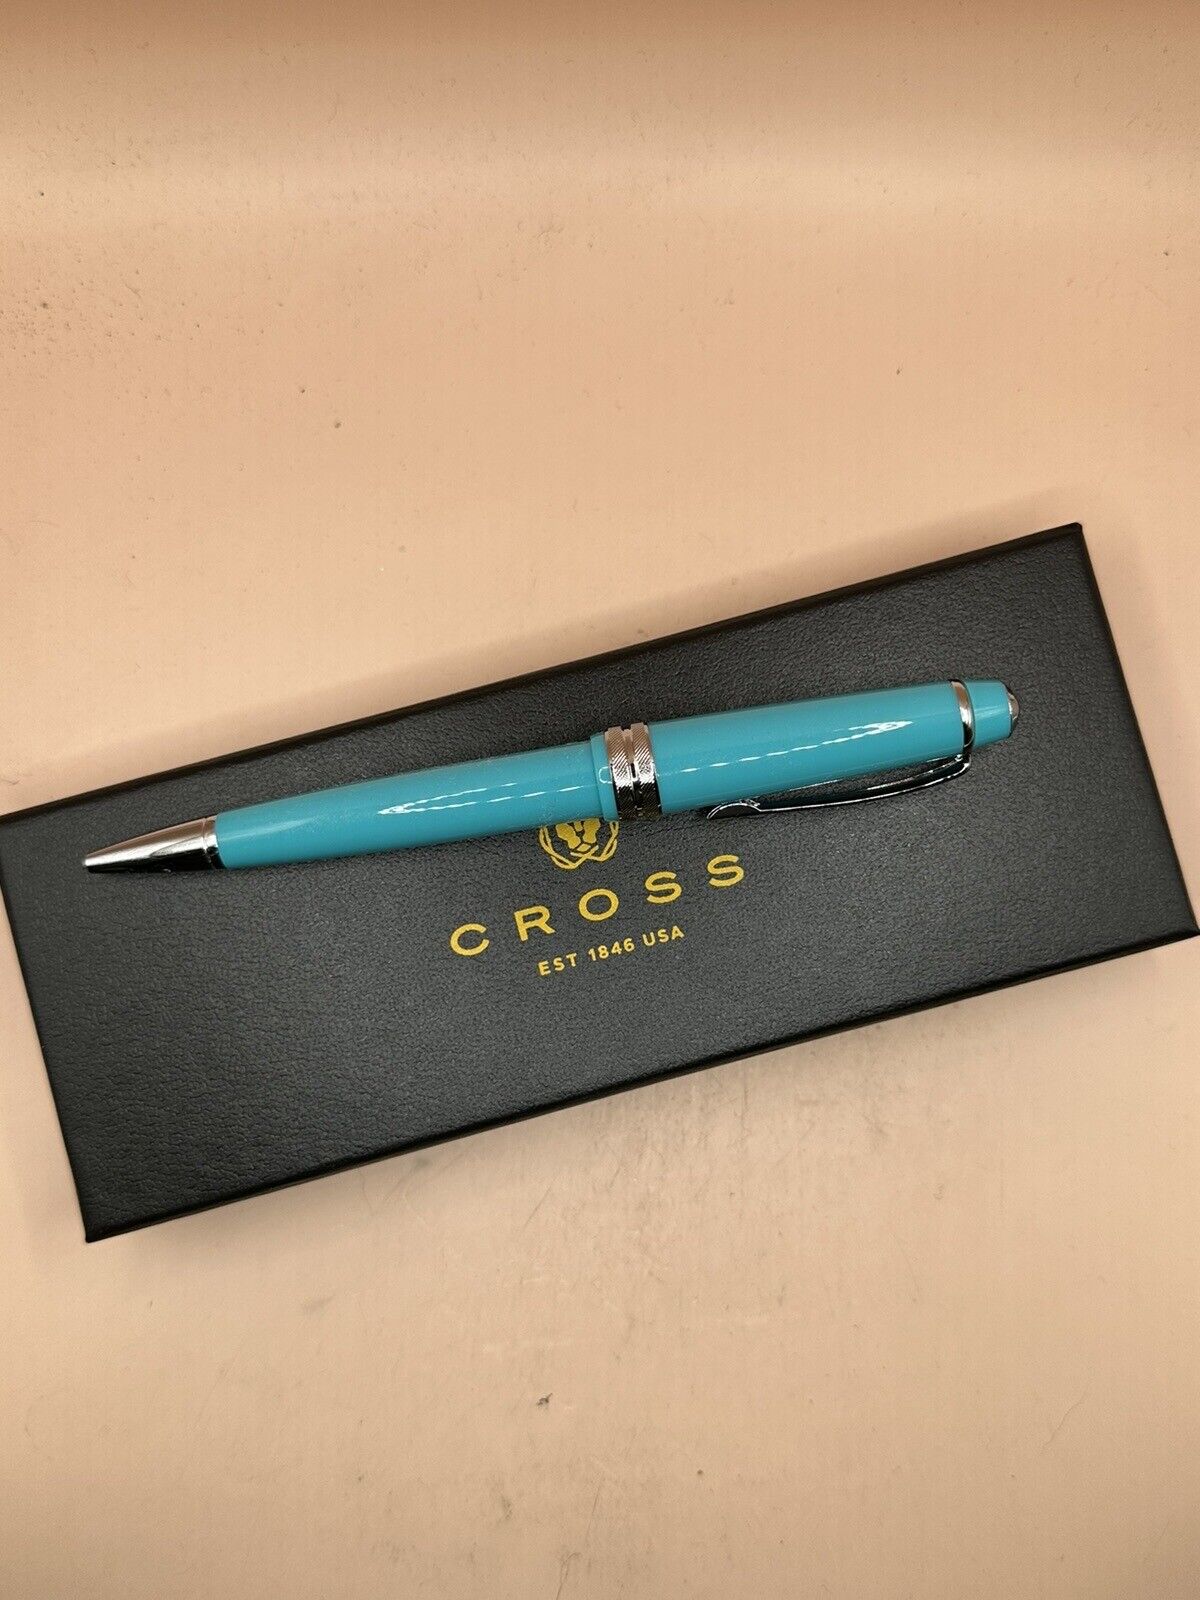 Cross Bailey Light Ballpoint Pen Teal with Chrome AT0742-6 NEW In The Box